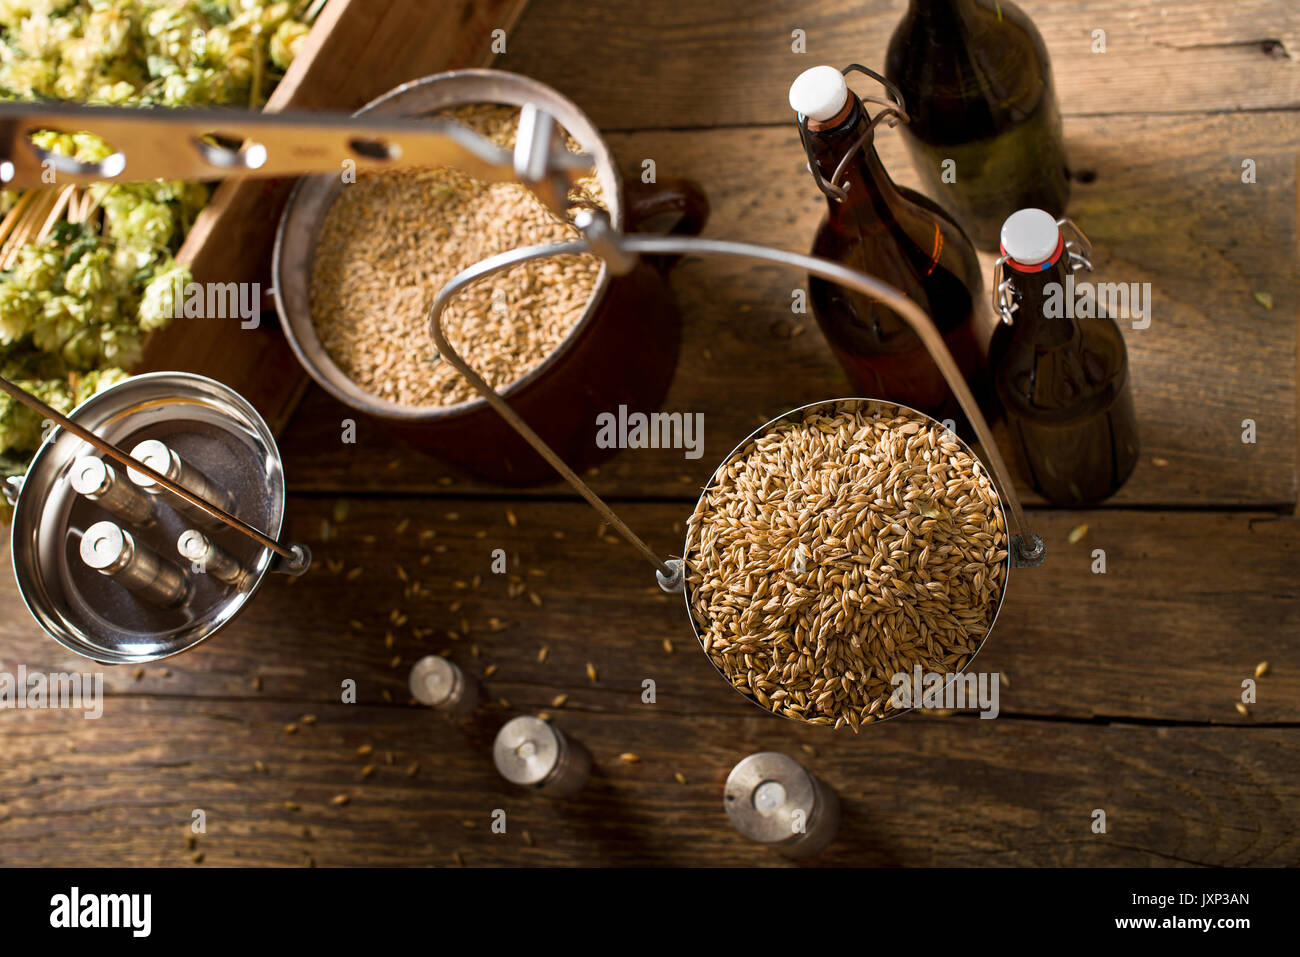 Man Weighs Malt for Home Brewing of Beer.  Top View. Stock Photo